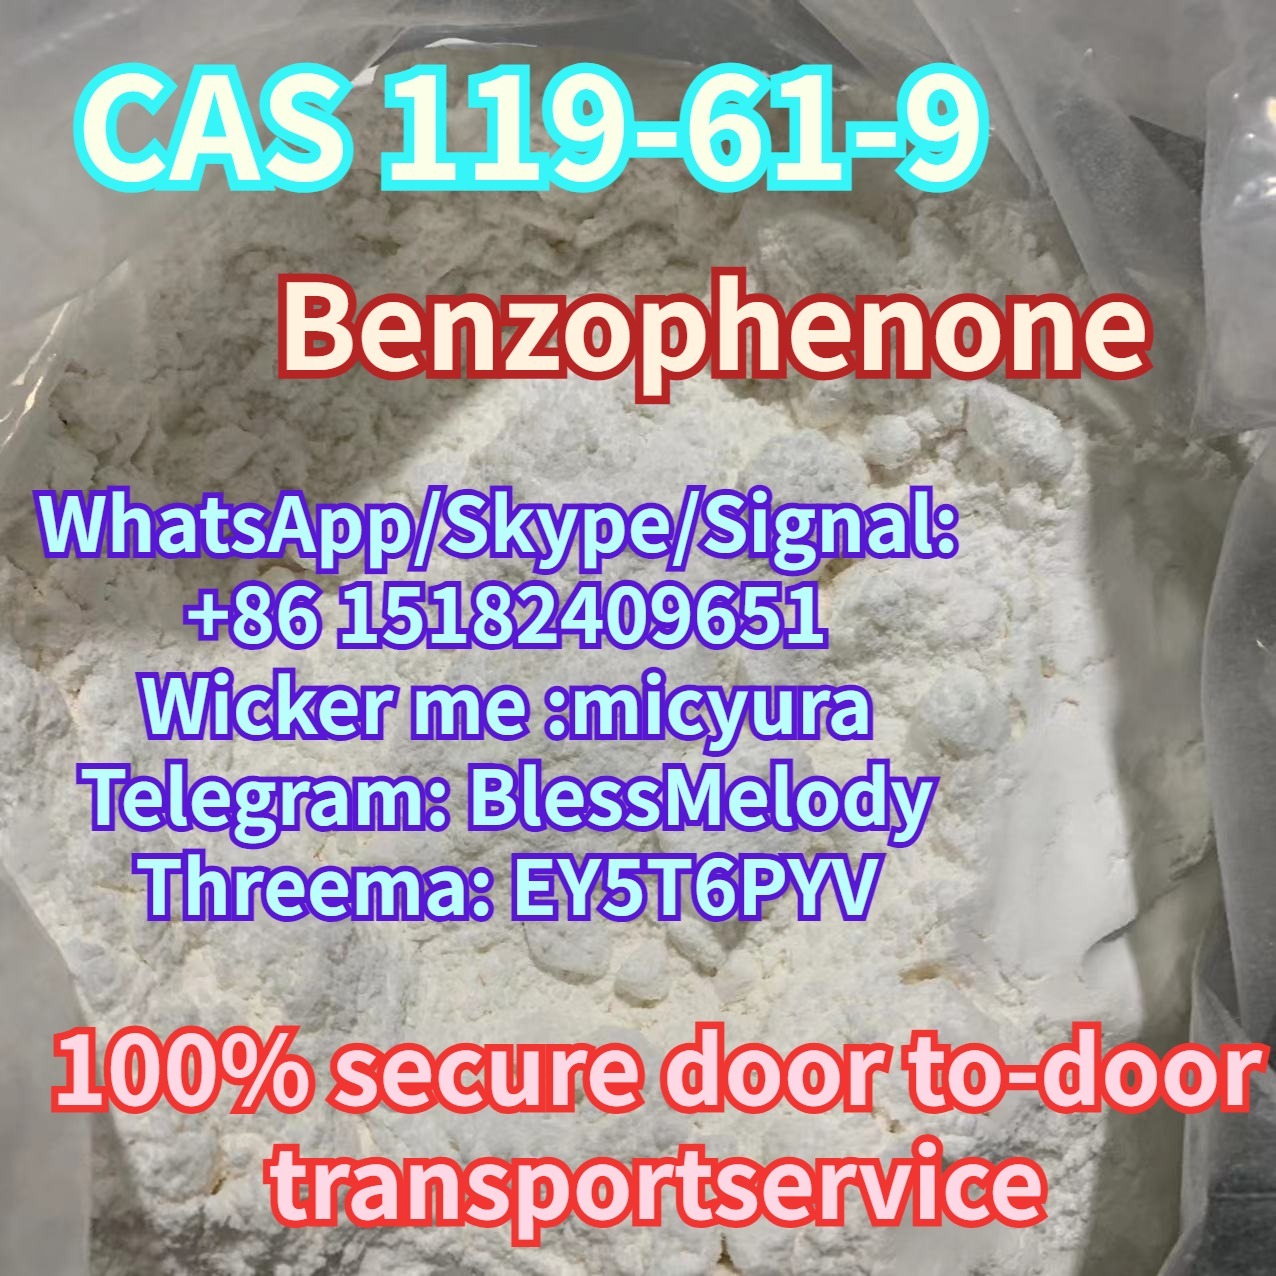 High quality and low price Benzophenone CAS 119-61-9 Fast and Safe Delivery